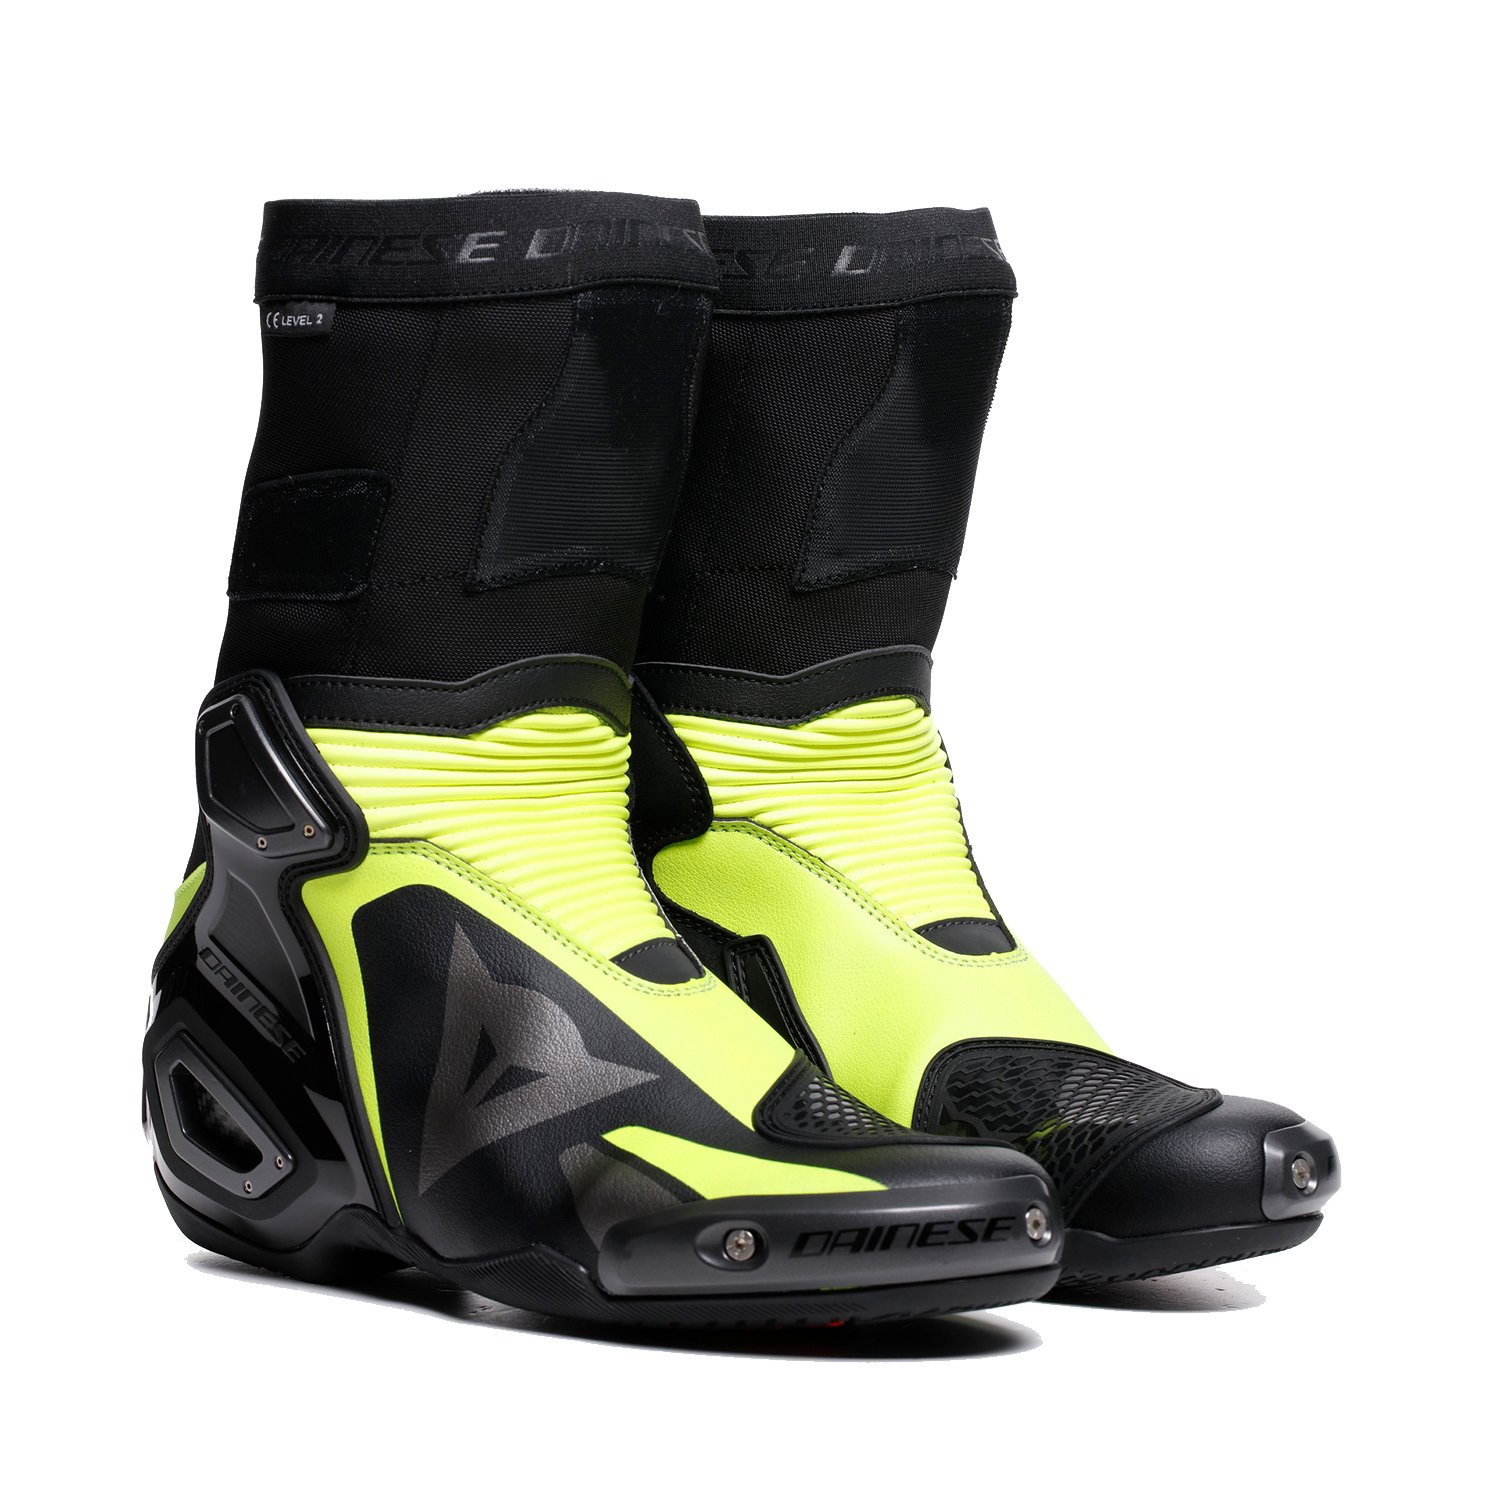 Image of Dainese Axial 2 Boots Black Yellow Fluo Taille 45